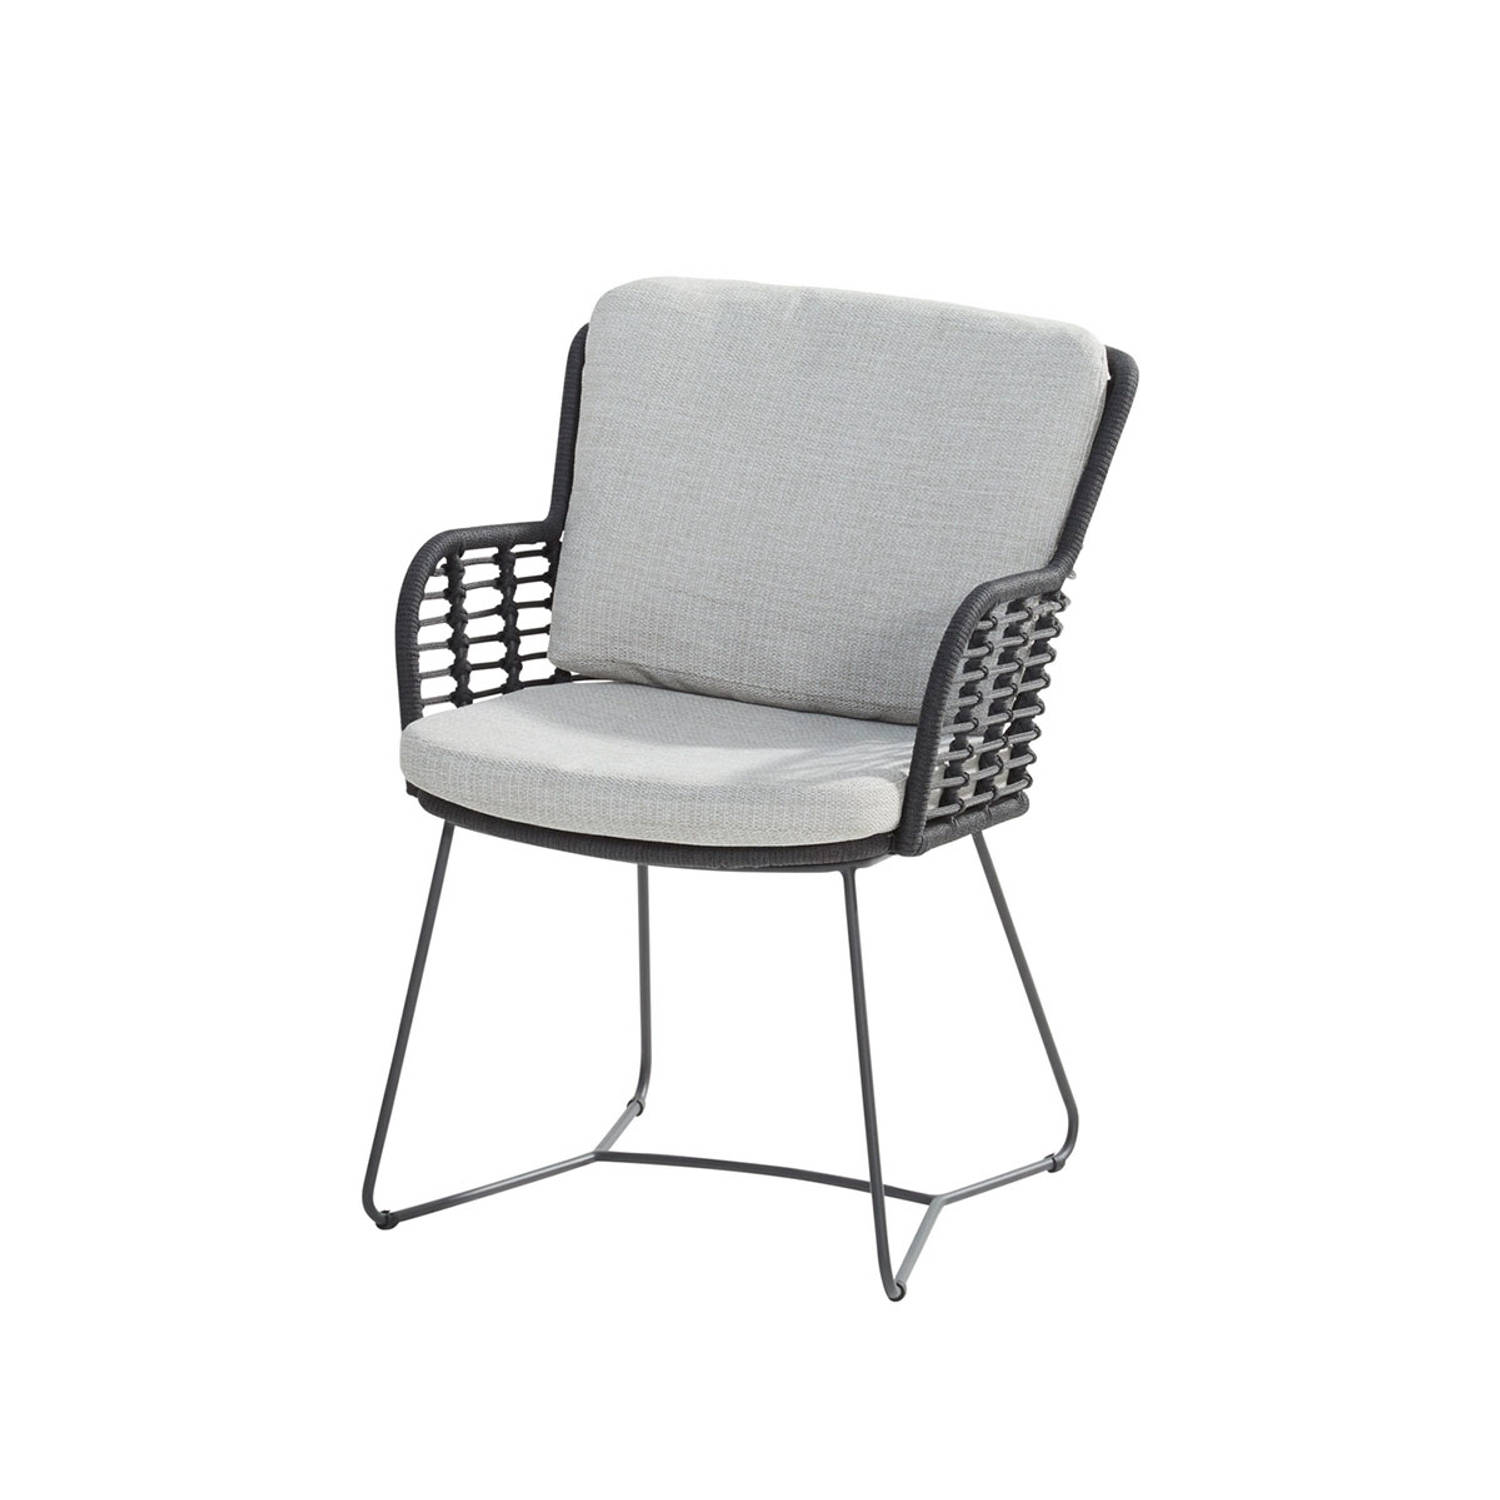 Fabrice dining chair Anthracite-Anthracite